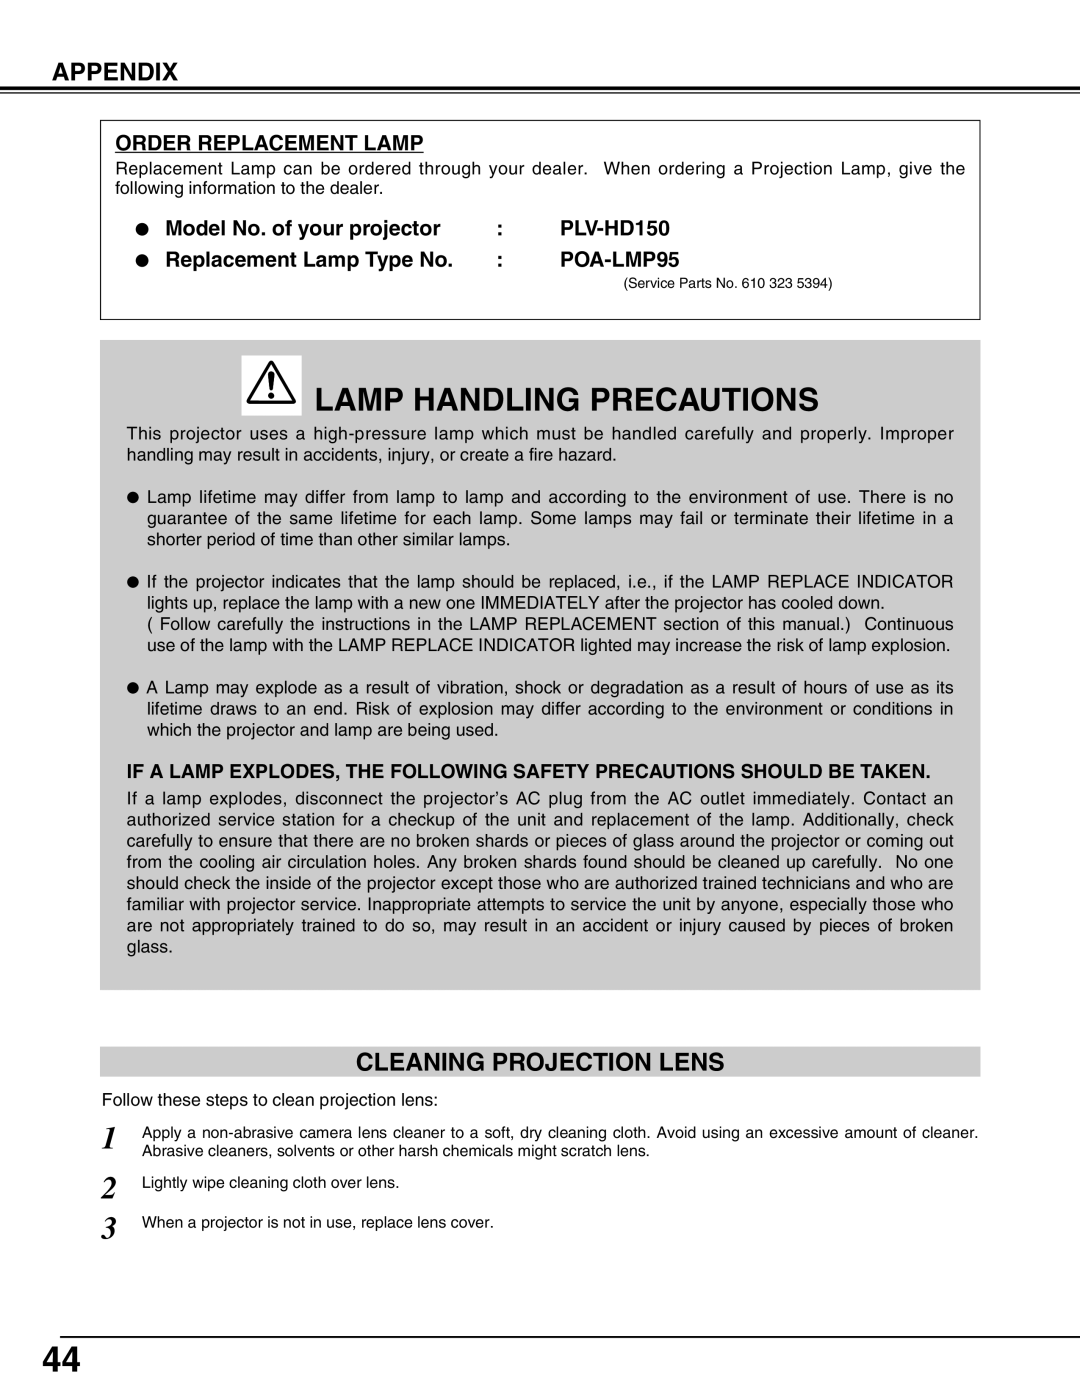 Sanyo PLV-HD150 owner manual Lamp Handling Precautions, Appendix, Cleaning Projection Lens 